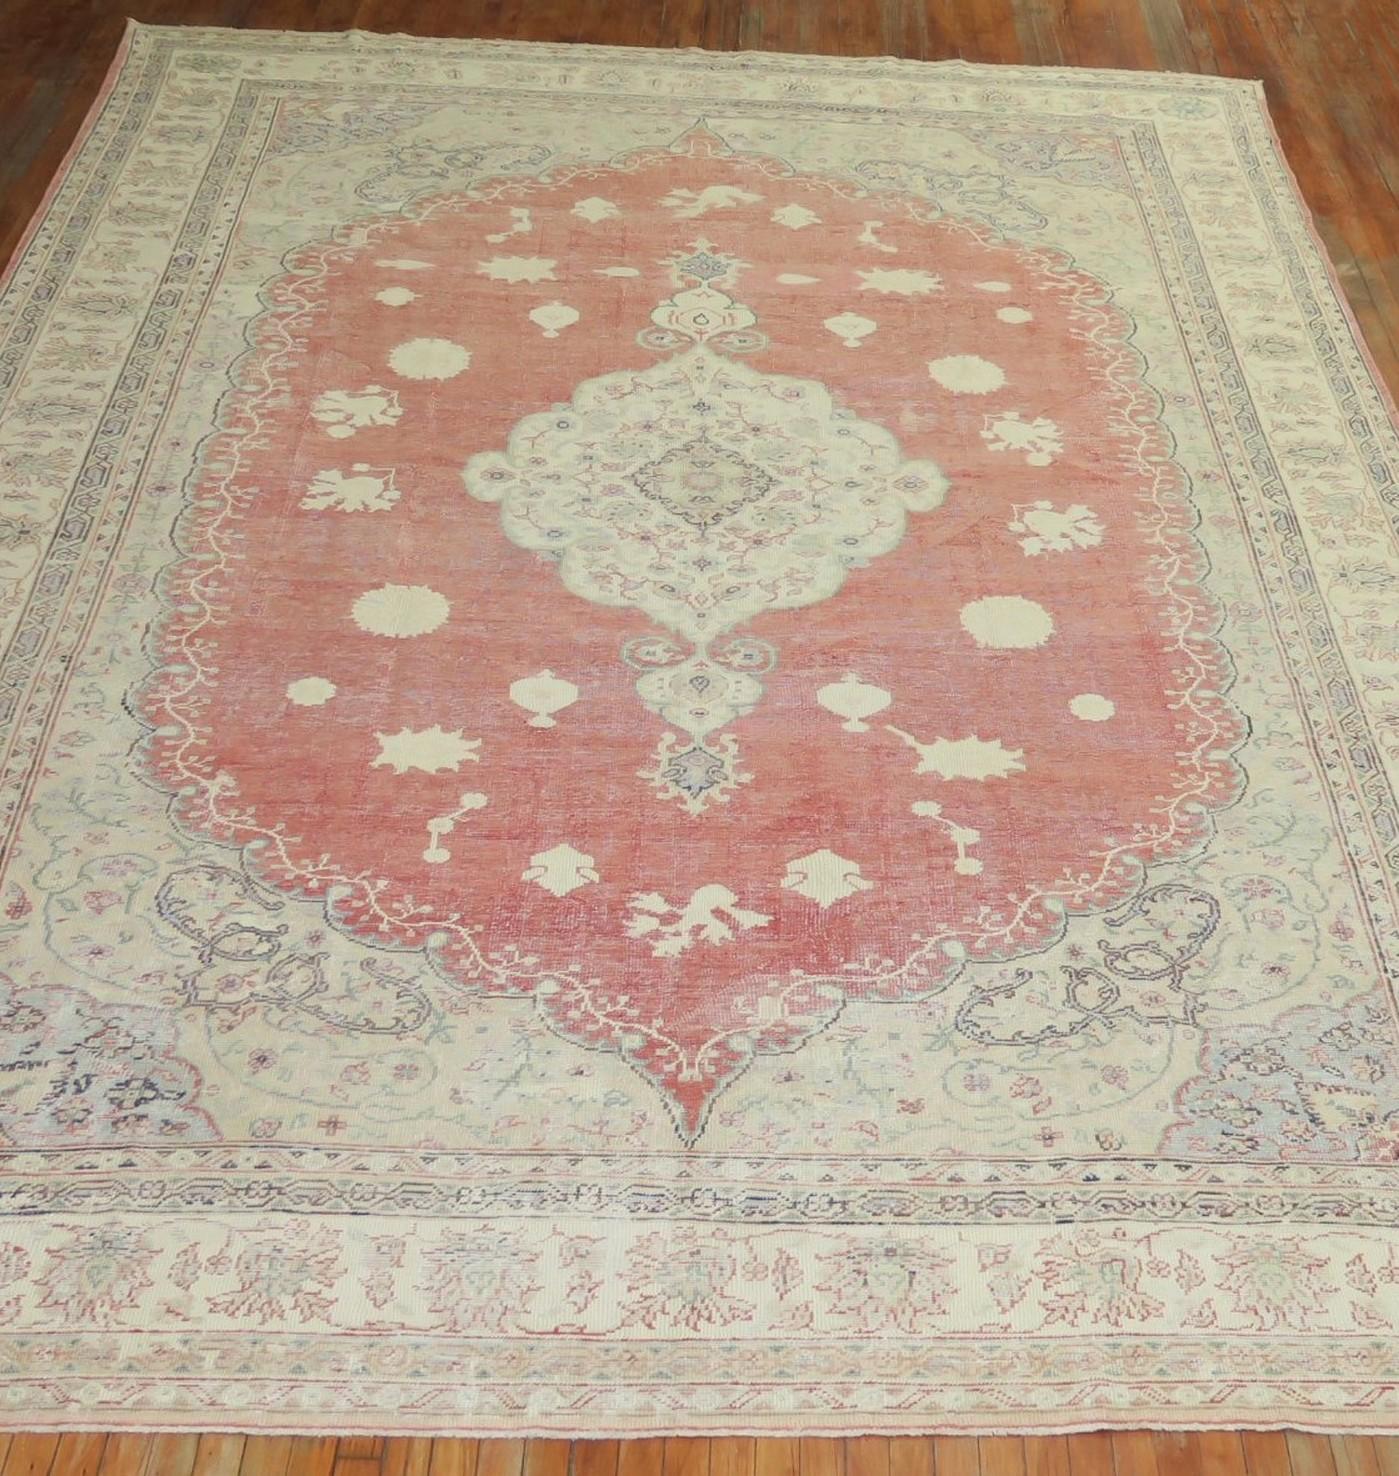 An oversize old Turkish Oushak rug, with ivory, soft brown, and light green accents and predominantly soft red tone, circa 1930.

Size: 10'5